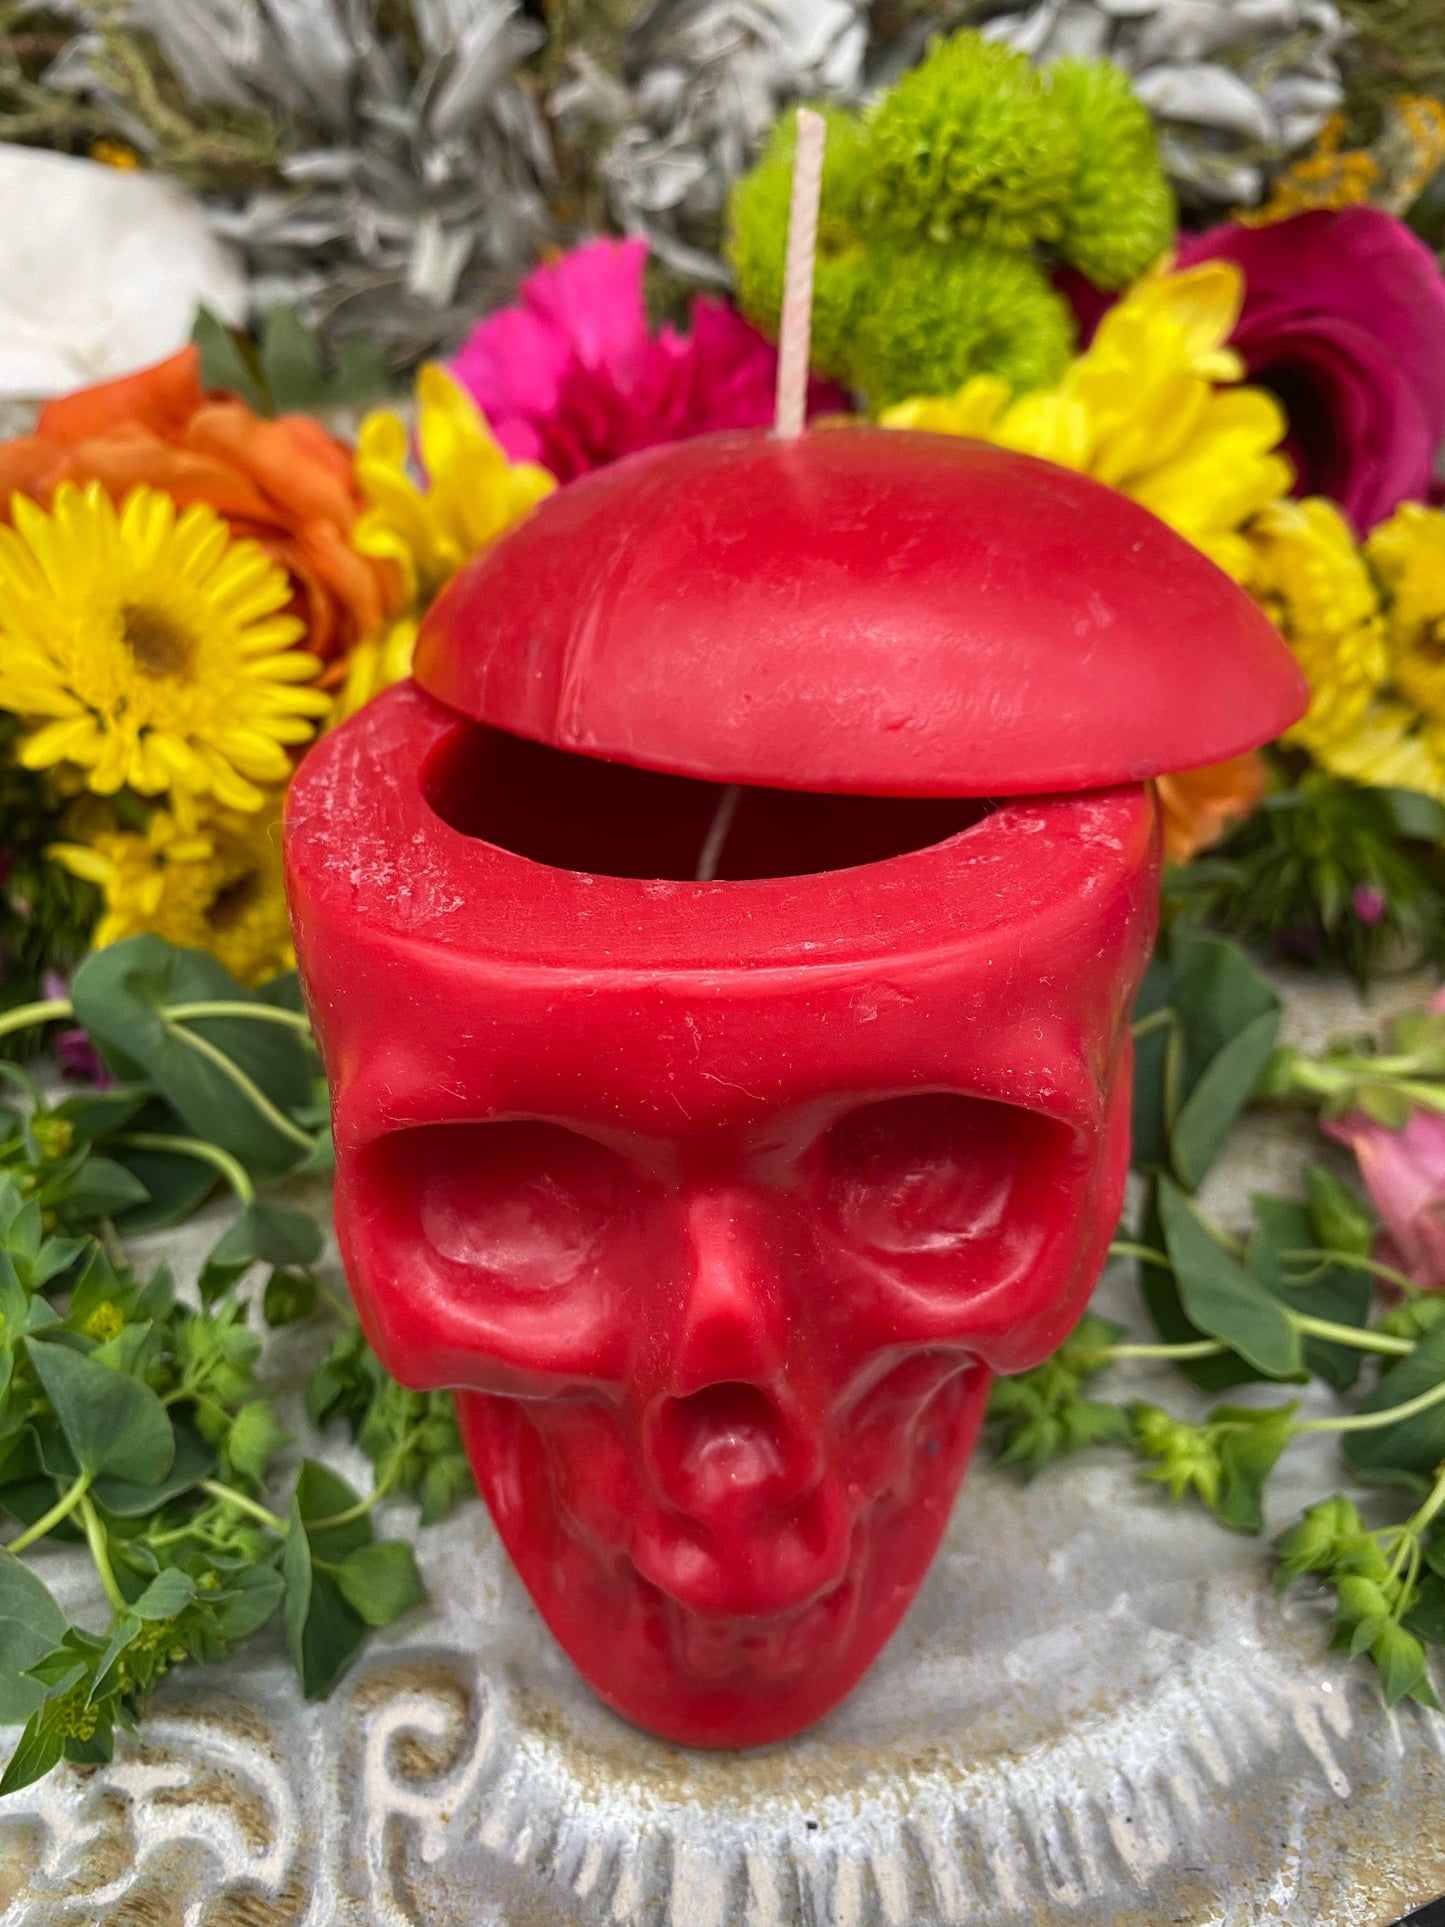 Loadable Skull Candle + Influence Thoughts + Hoodoo + Voodoo + Conjure